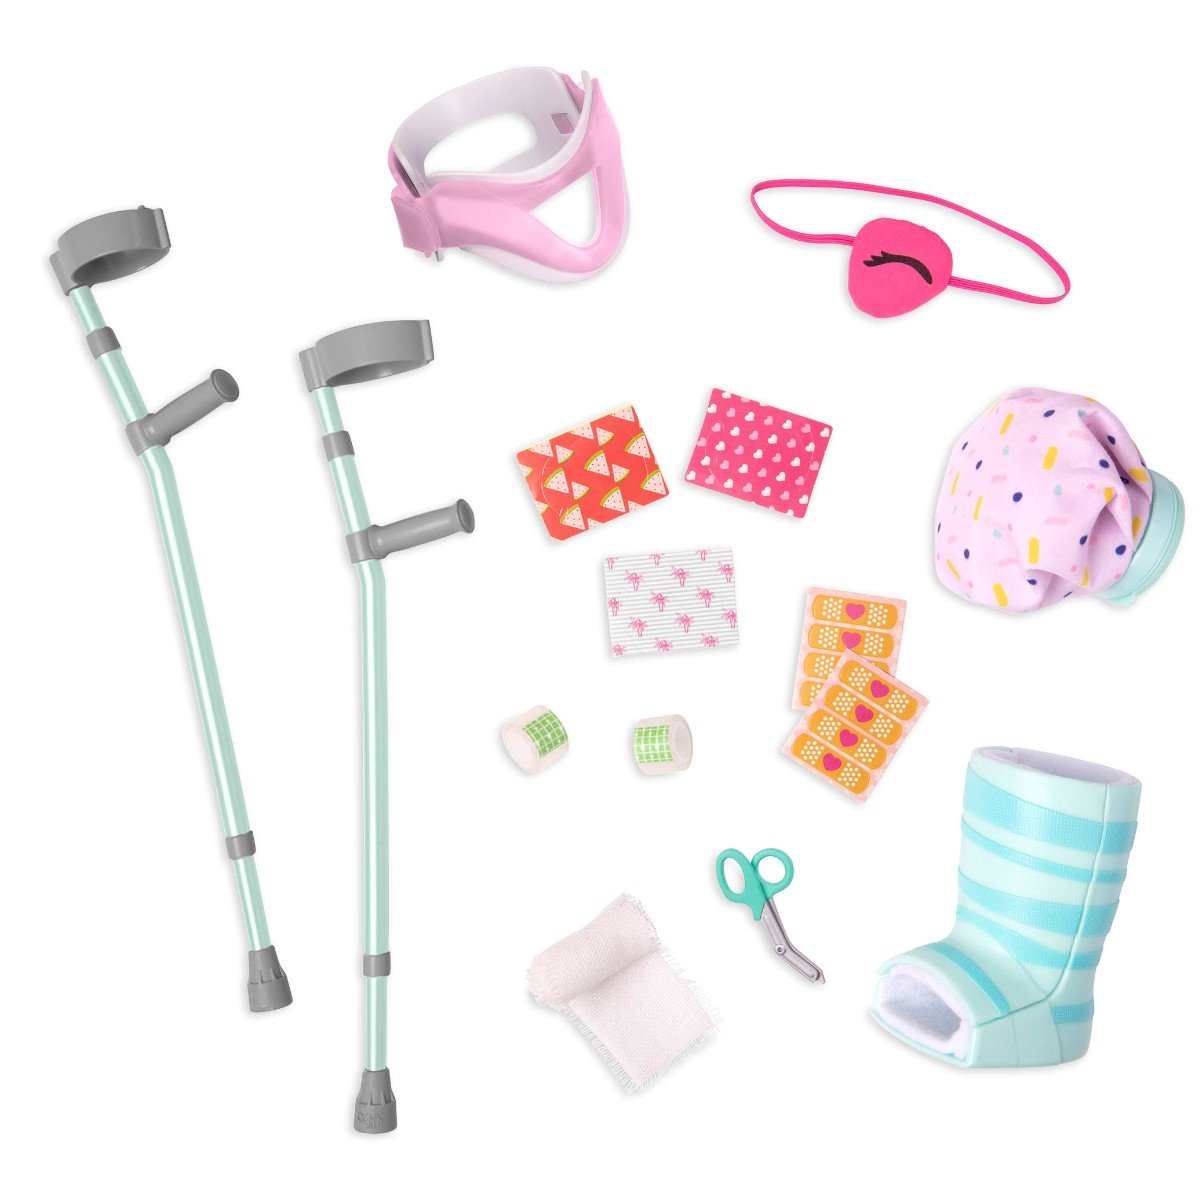 Our Generation - Medical Accessories Set (737985)